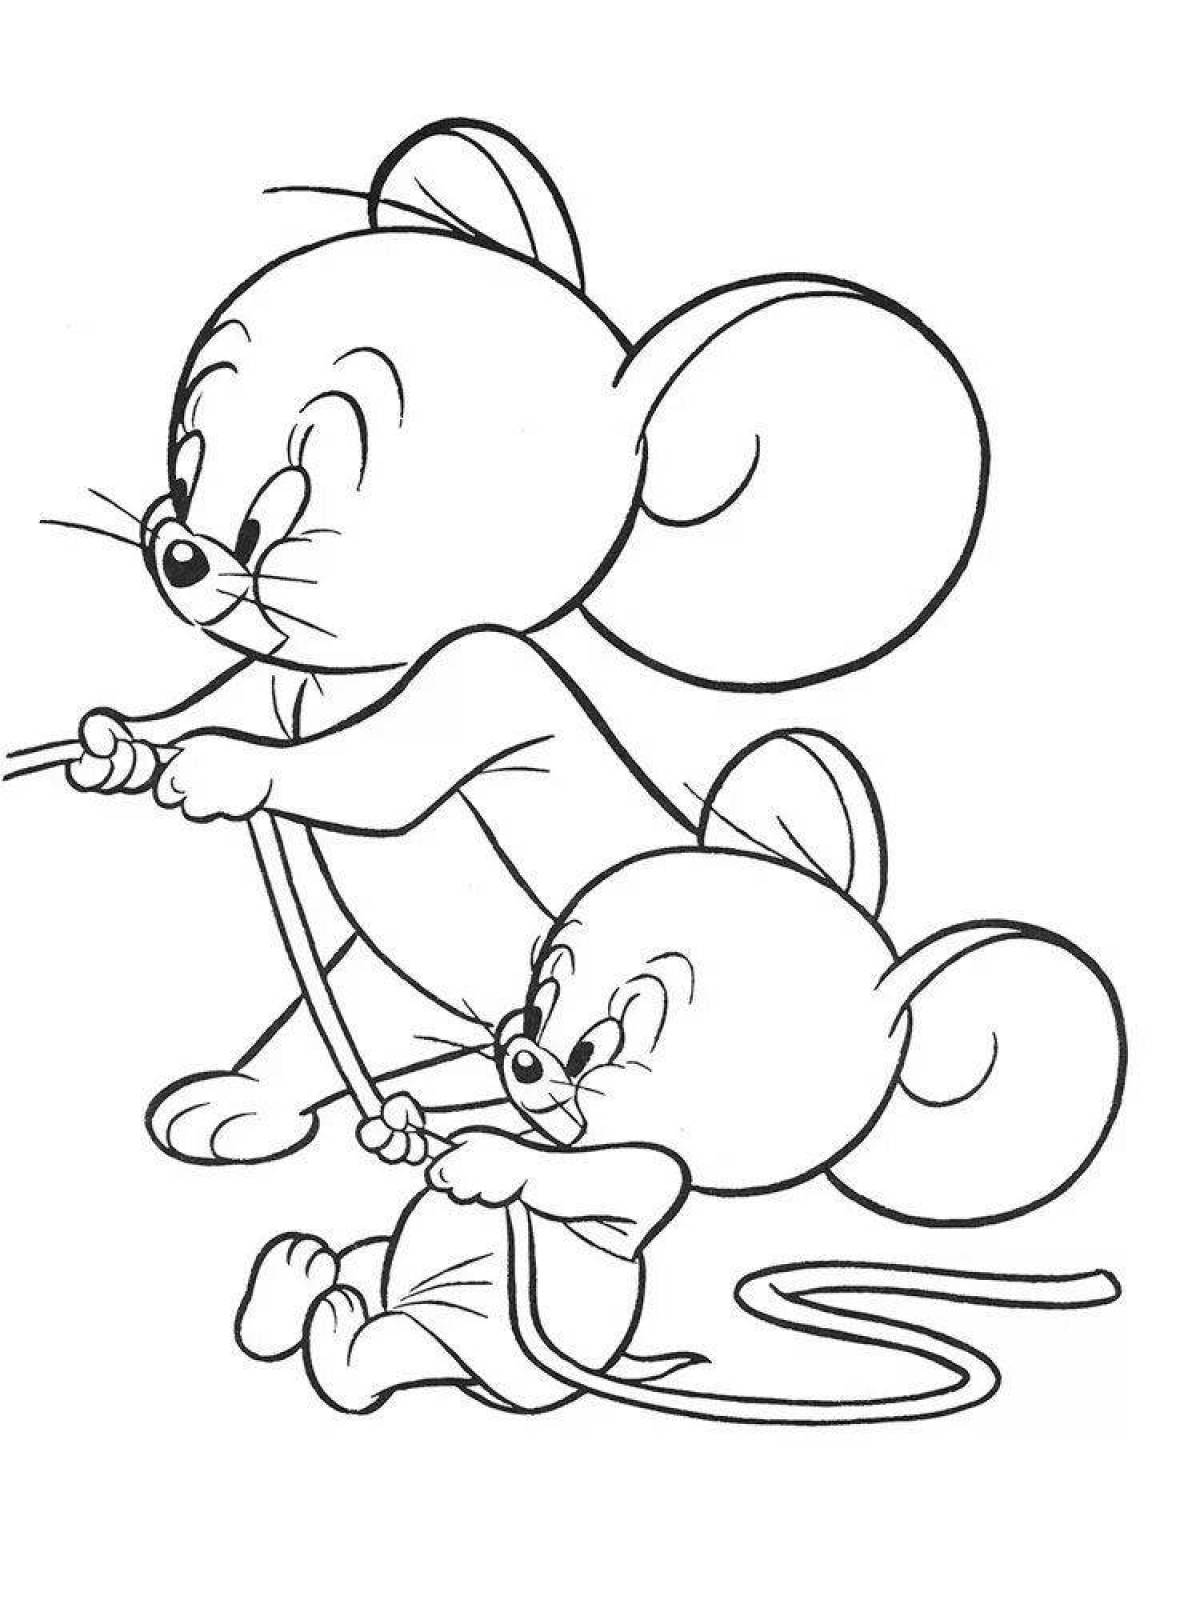 Tim the adorable mouse coloring book